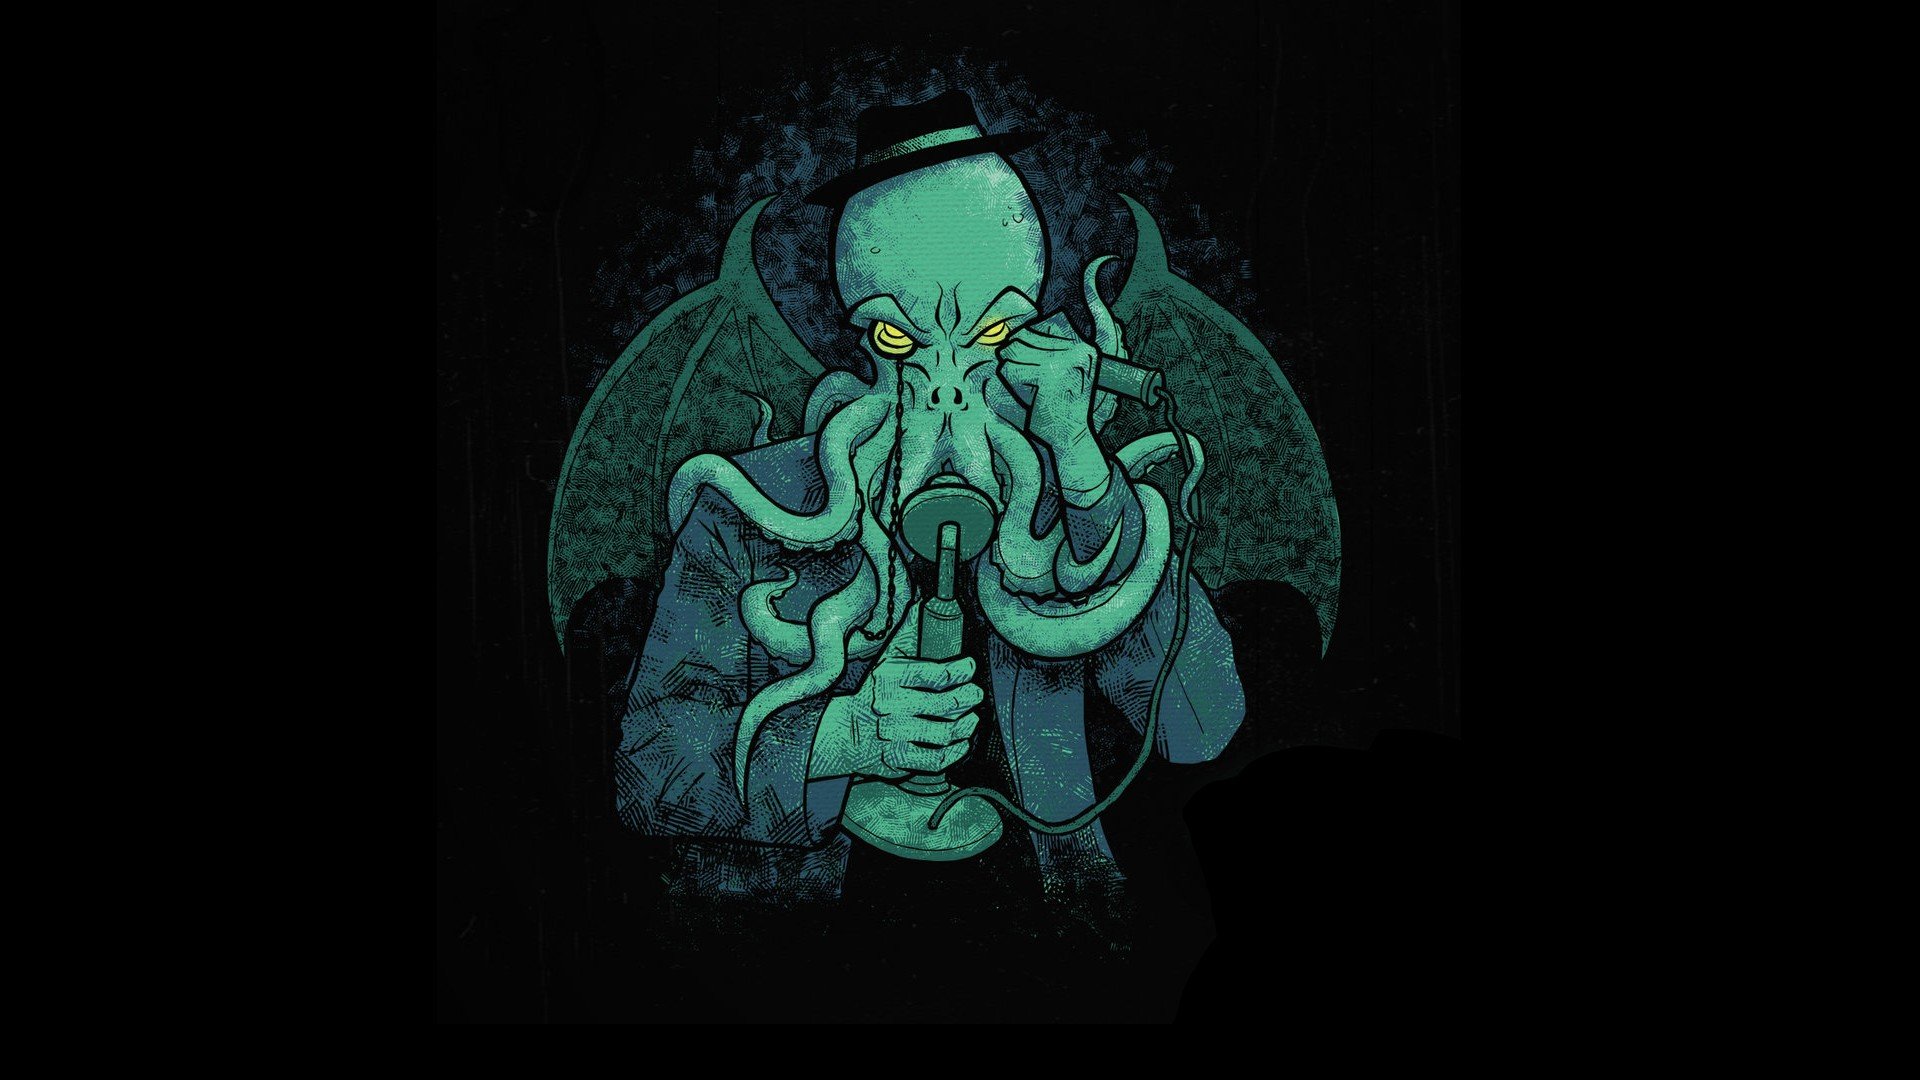 3007284 1920x1080 Cthulhu  Rare Gallery HD Wallpapers